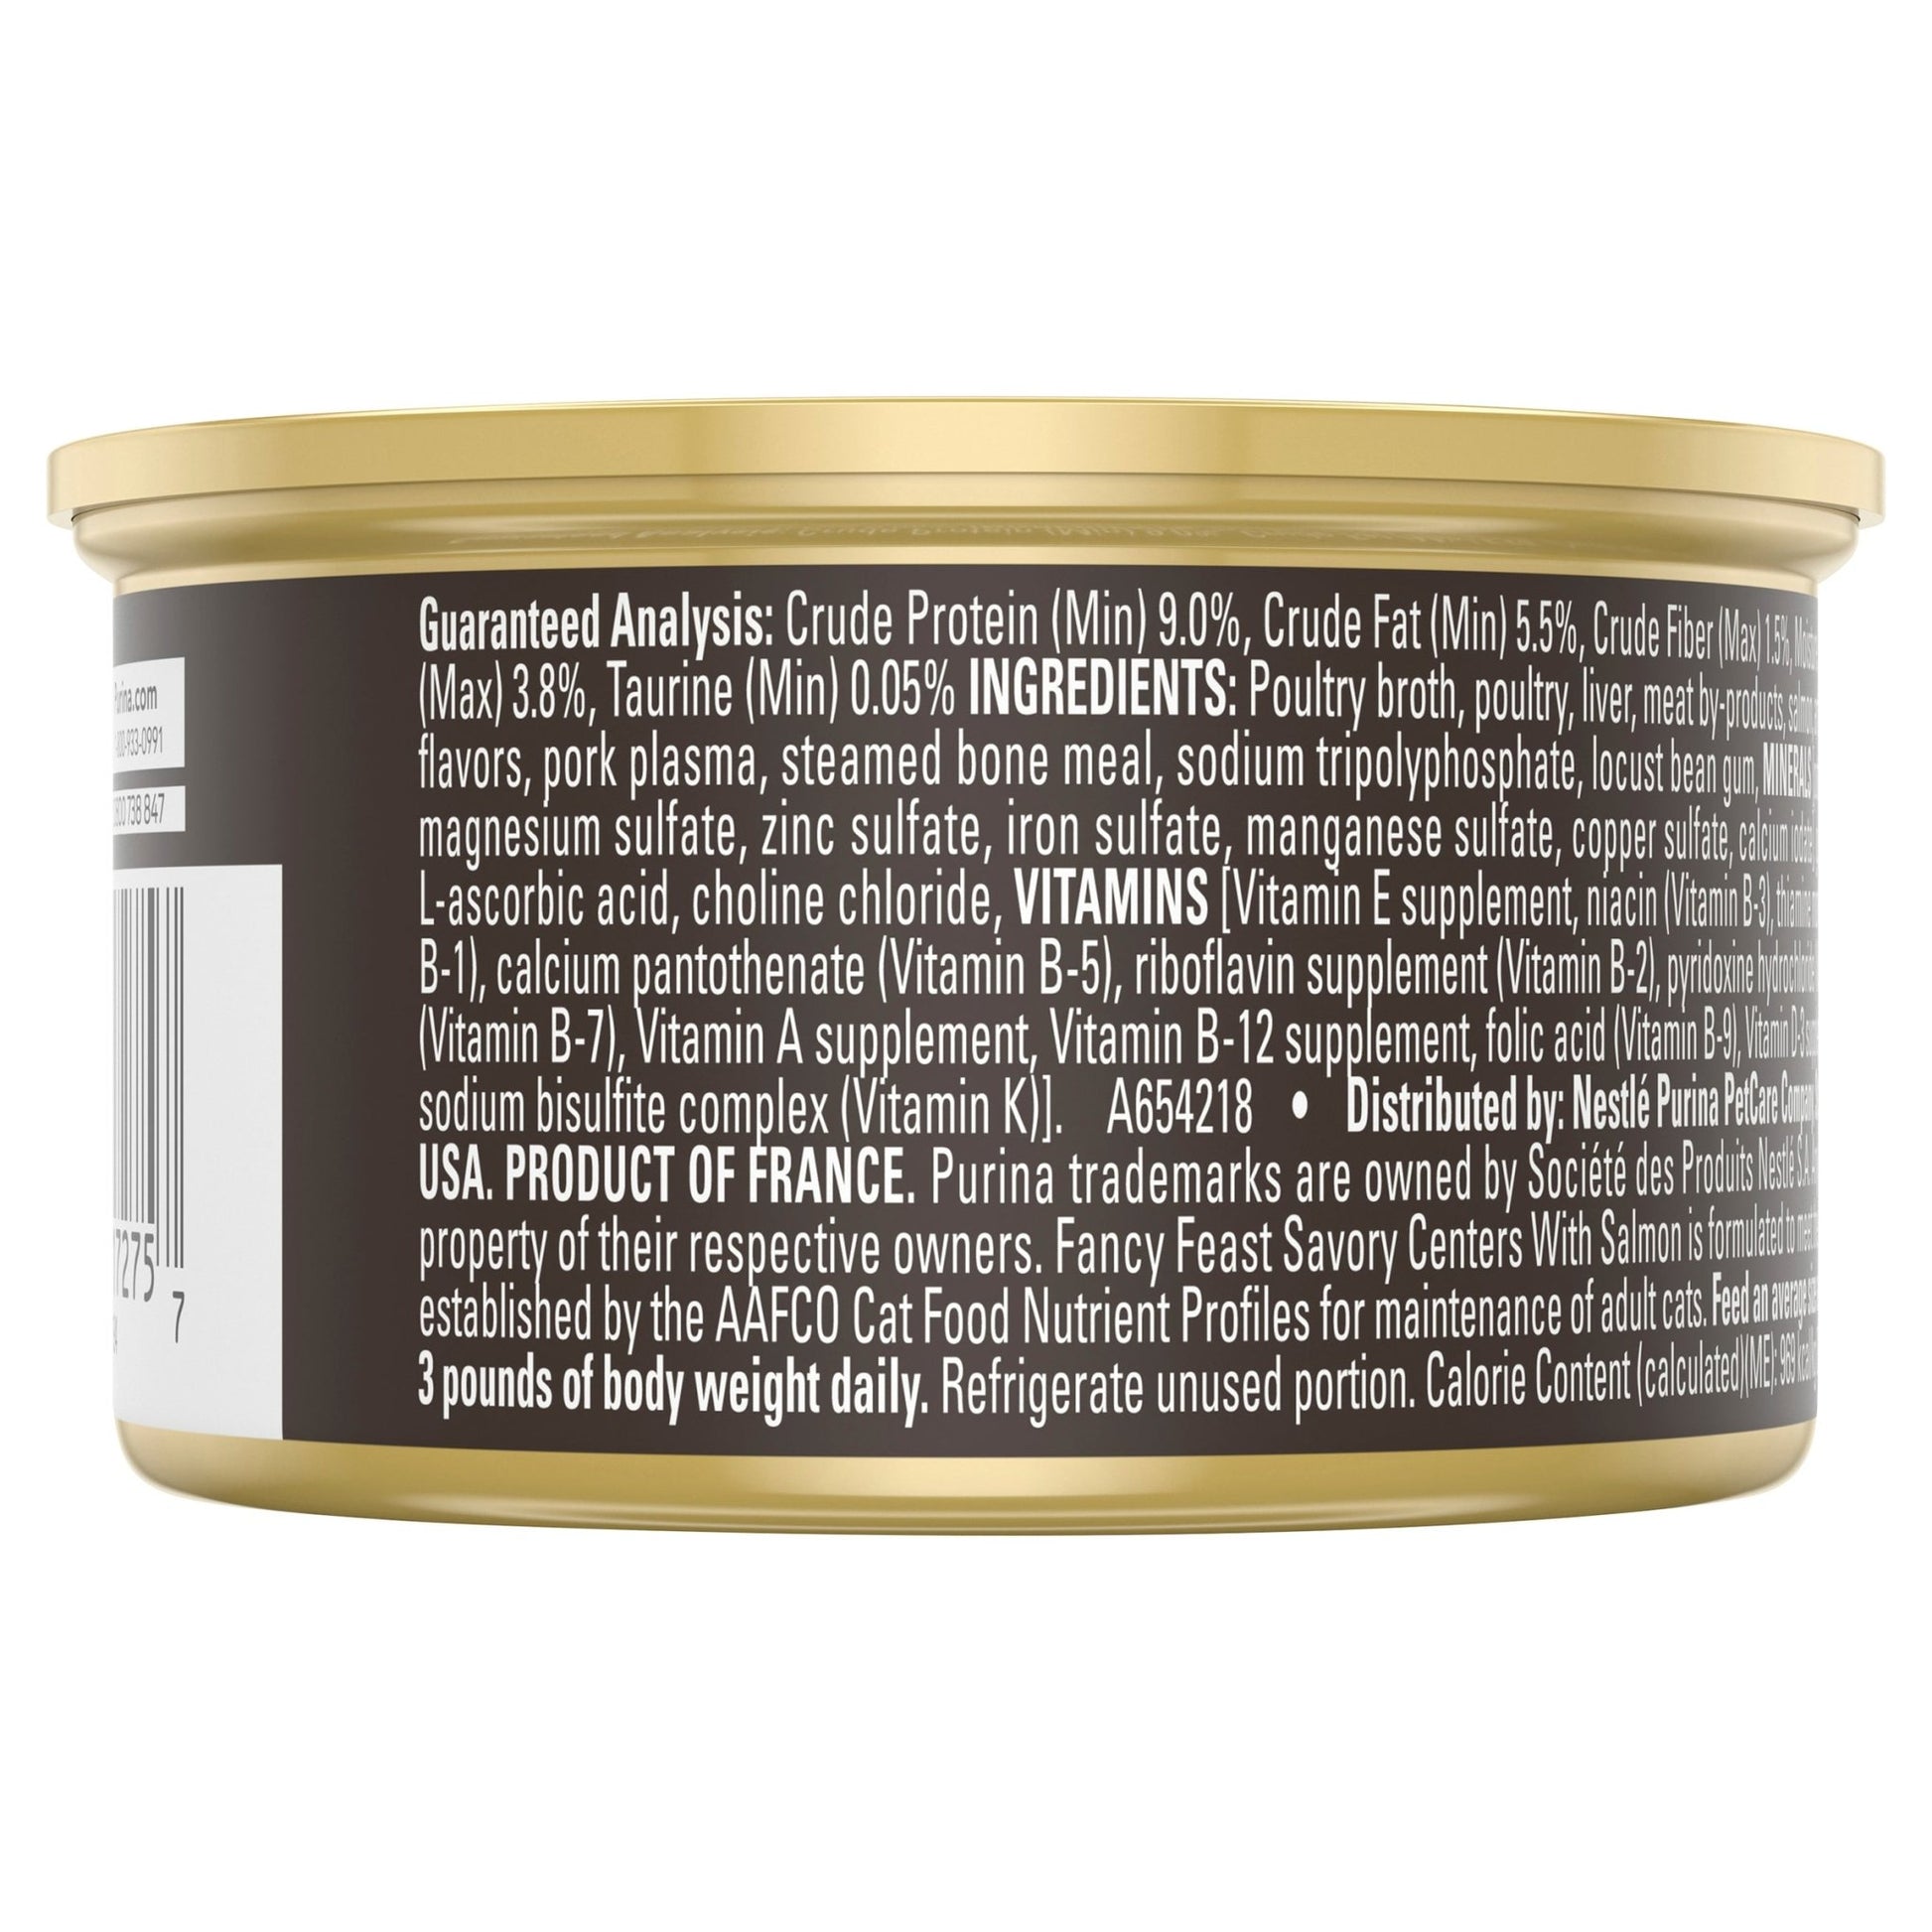 Fancy Feast Savory Centers Pate With Salmon and a Gourmet Gravy Center 85g - Woonona Petfood & Produce